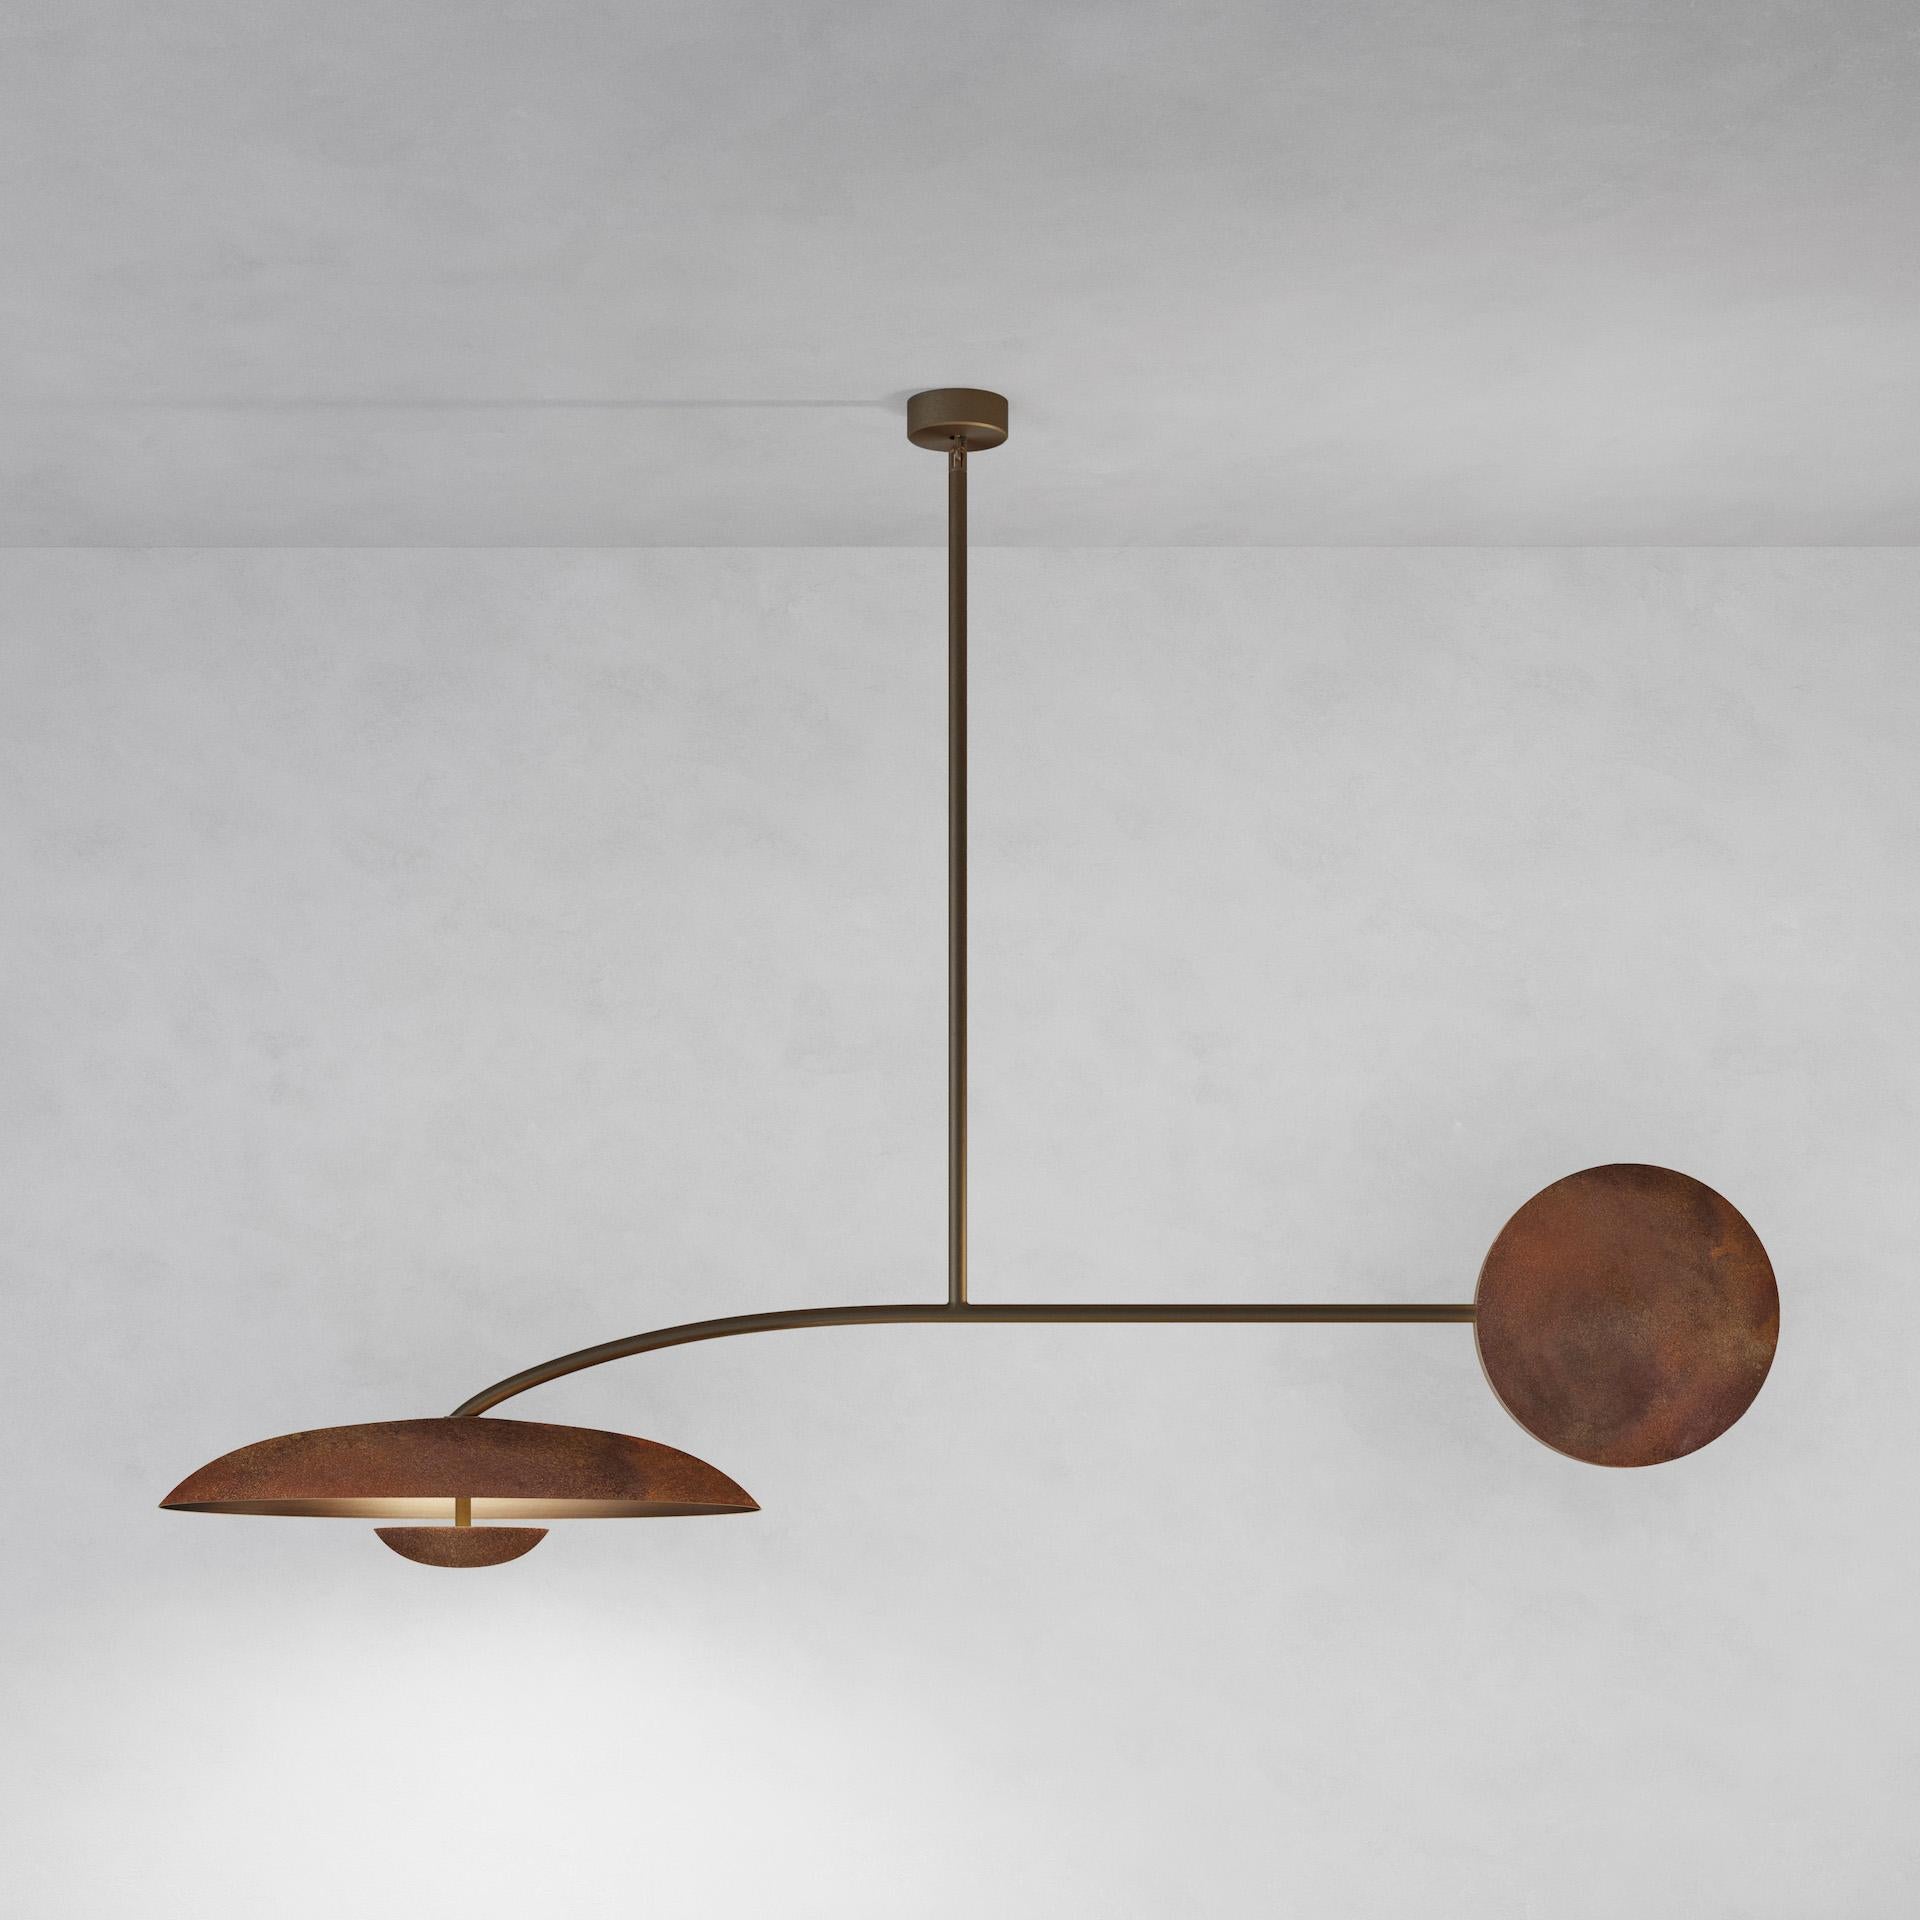 Orbit Solo Rust Ceiling Light by Atelier001
Dimensions: D60 x W160 X H115 cm
Materials: Shade Rust patinated brass
Framework Medium bronze
Also Available: In different finishes.

All our lamps can be wired according to each country. If sold to the